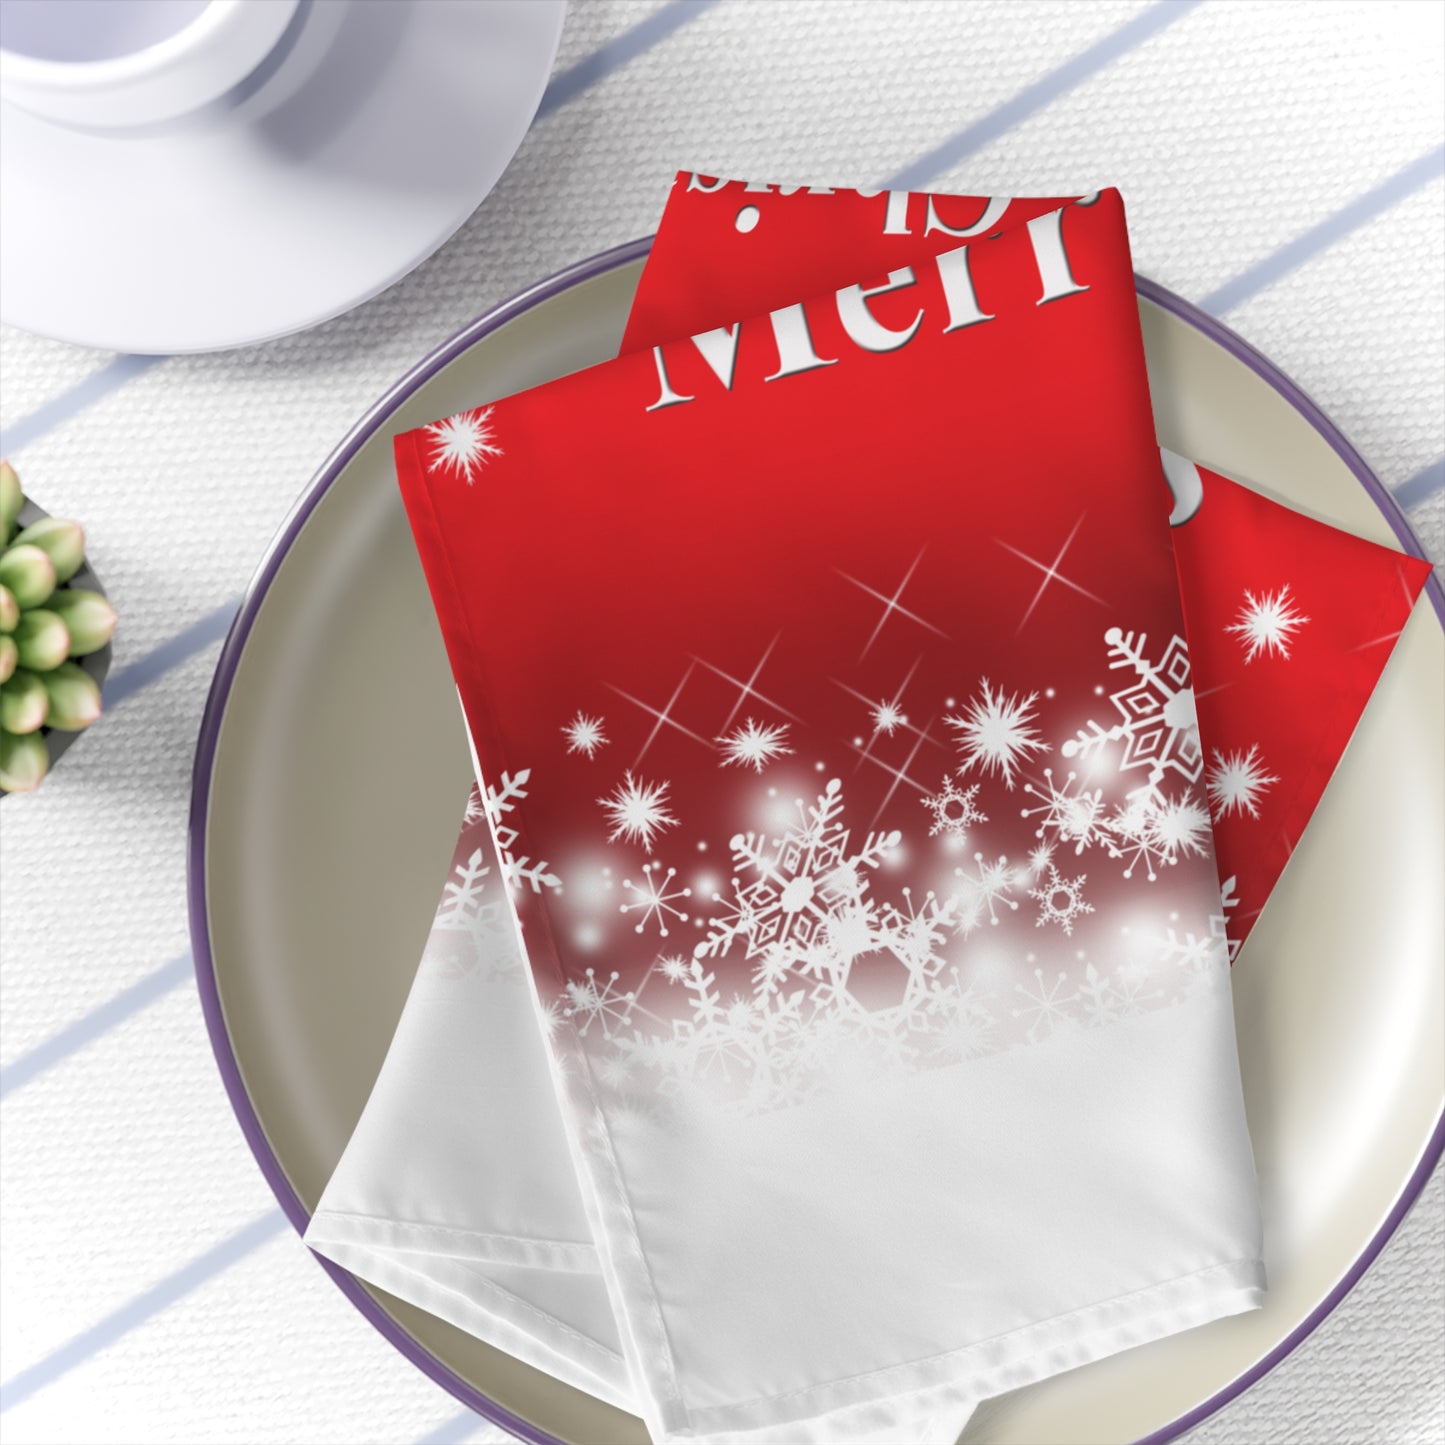 "Merry Christmas" Napkins with White Snowflakes and Red Background, Elegant Design for Your Holiday Party